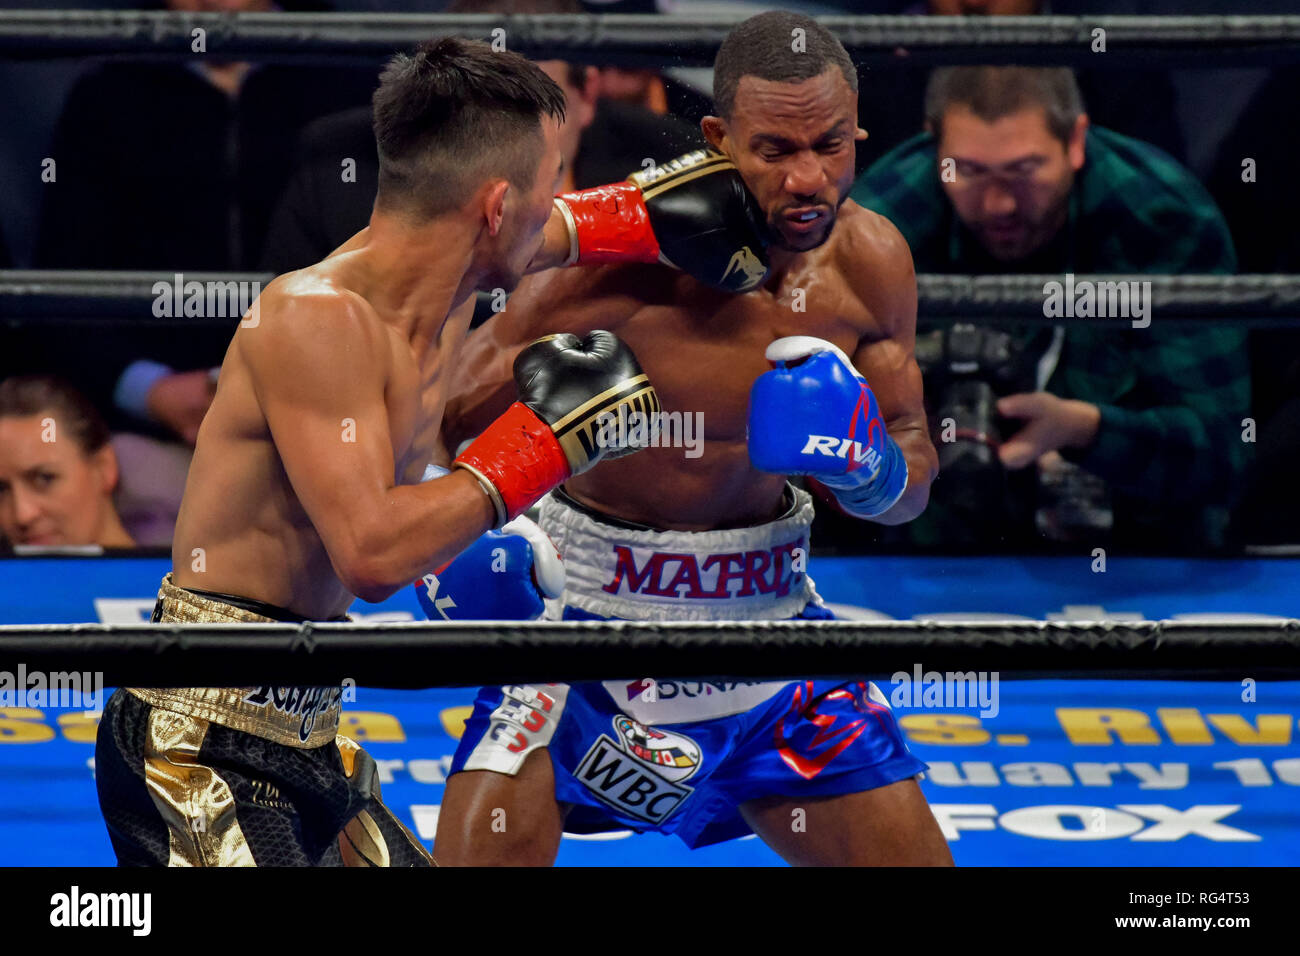 Brooklyn, New York, USA. 26th Jan, 2019. TUGSTSOGT NYAMBAYAR (black and gold trunks) battles CLAUDIO MARRERO in a WBC World Featherweight Eliminator bout at the Barclays Center in Brooklyn, New York. Credit: Joel Plummer/ZUMA Wire/Alamy Live News Stock Photo